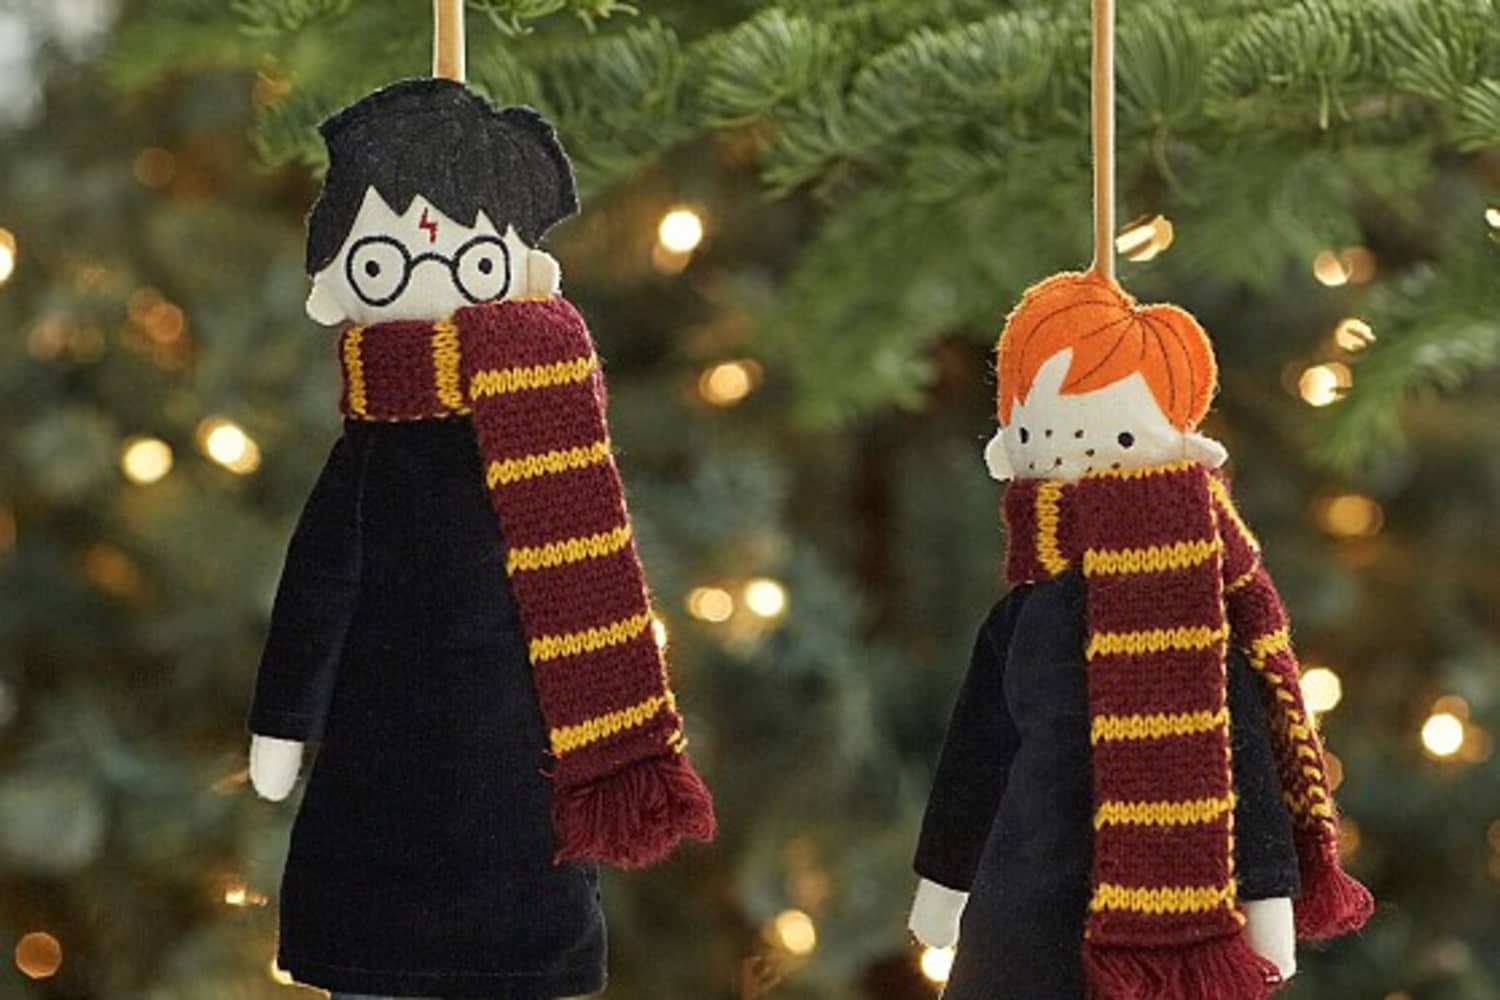 Pottery Barn Launches Harry Potter Decor For All Ages